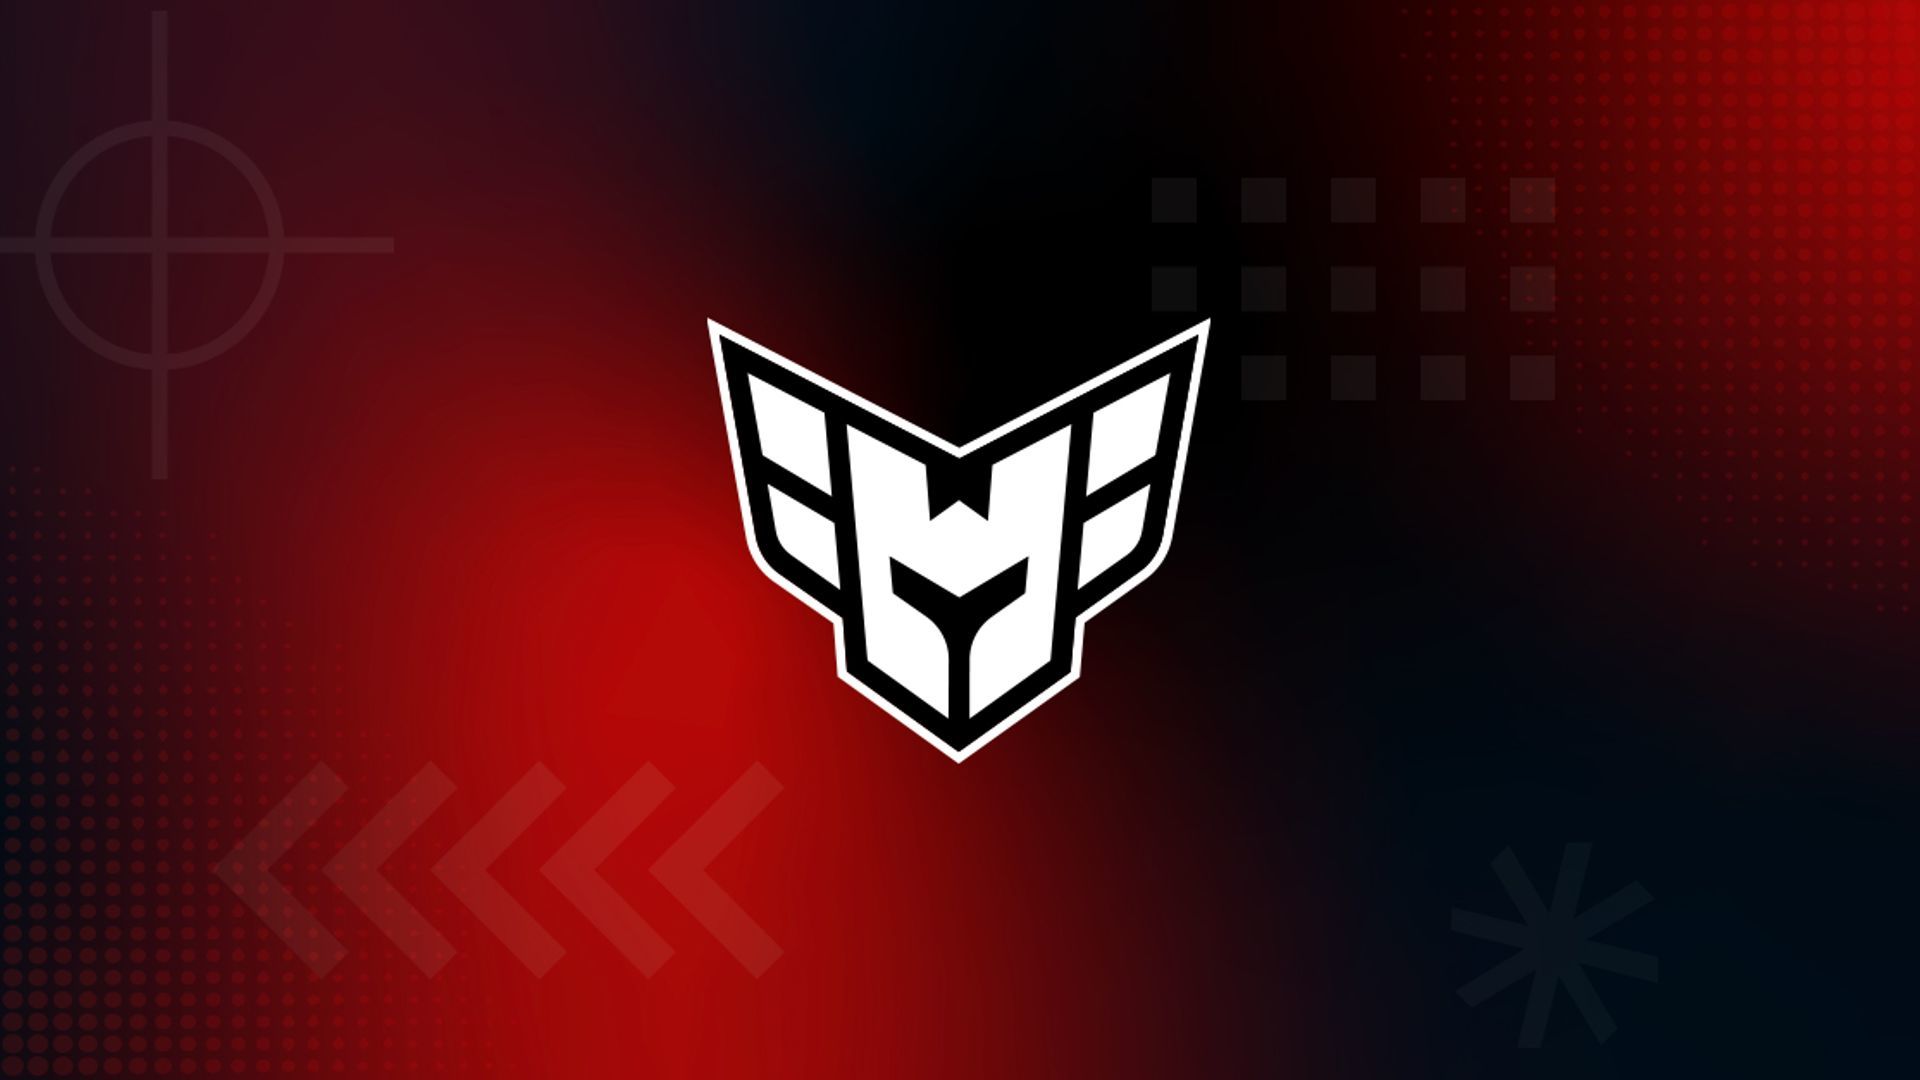 Heroic has announced an agreement to sell the esports company -